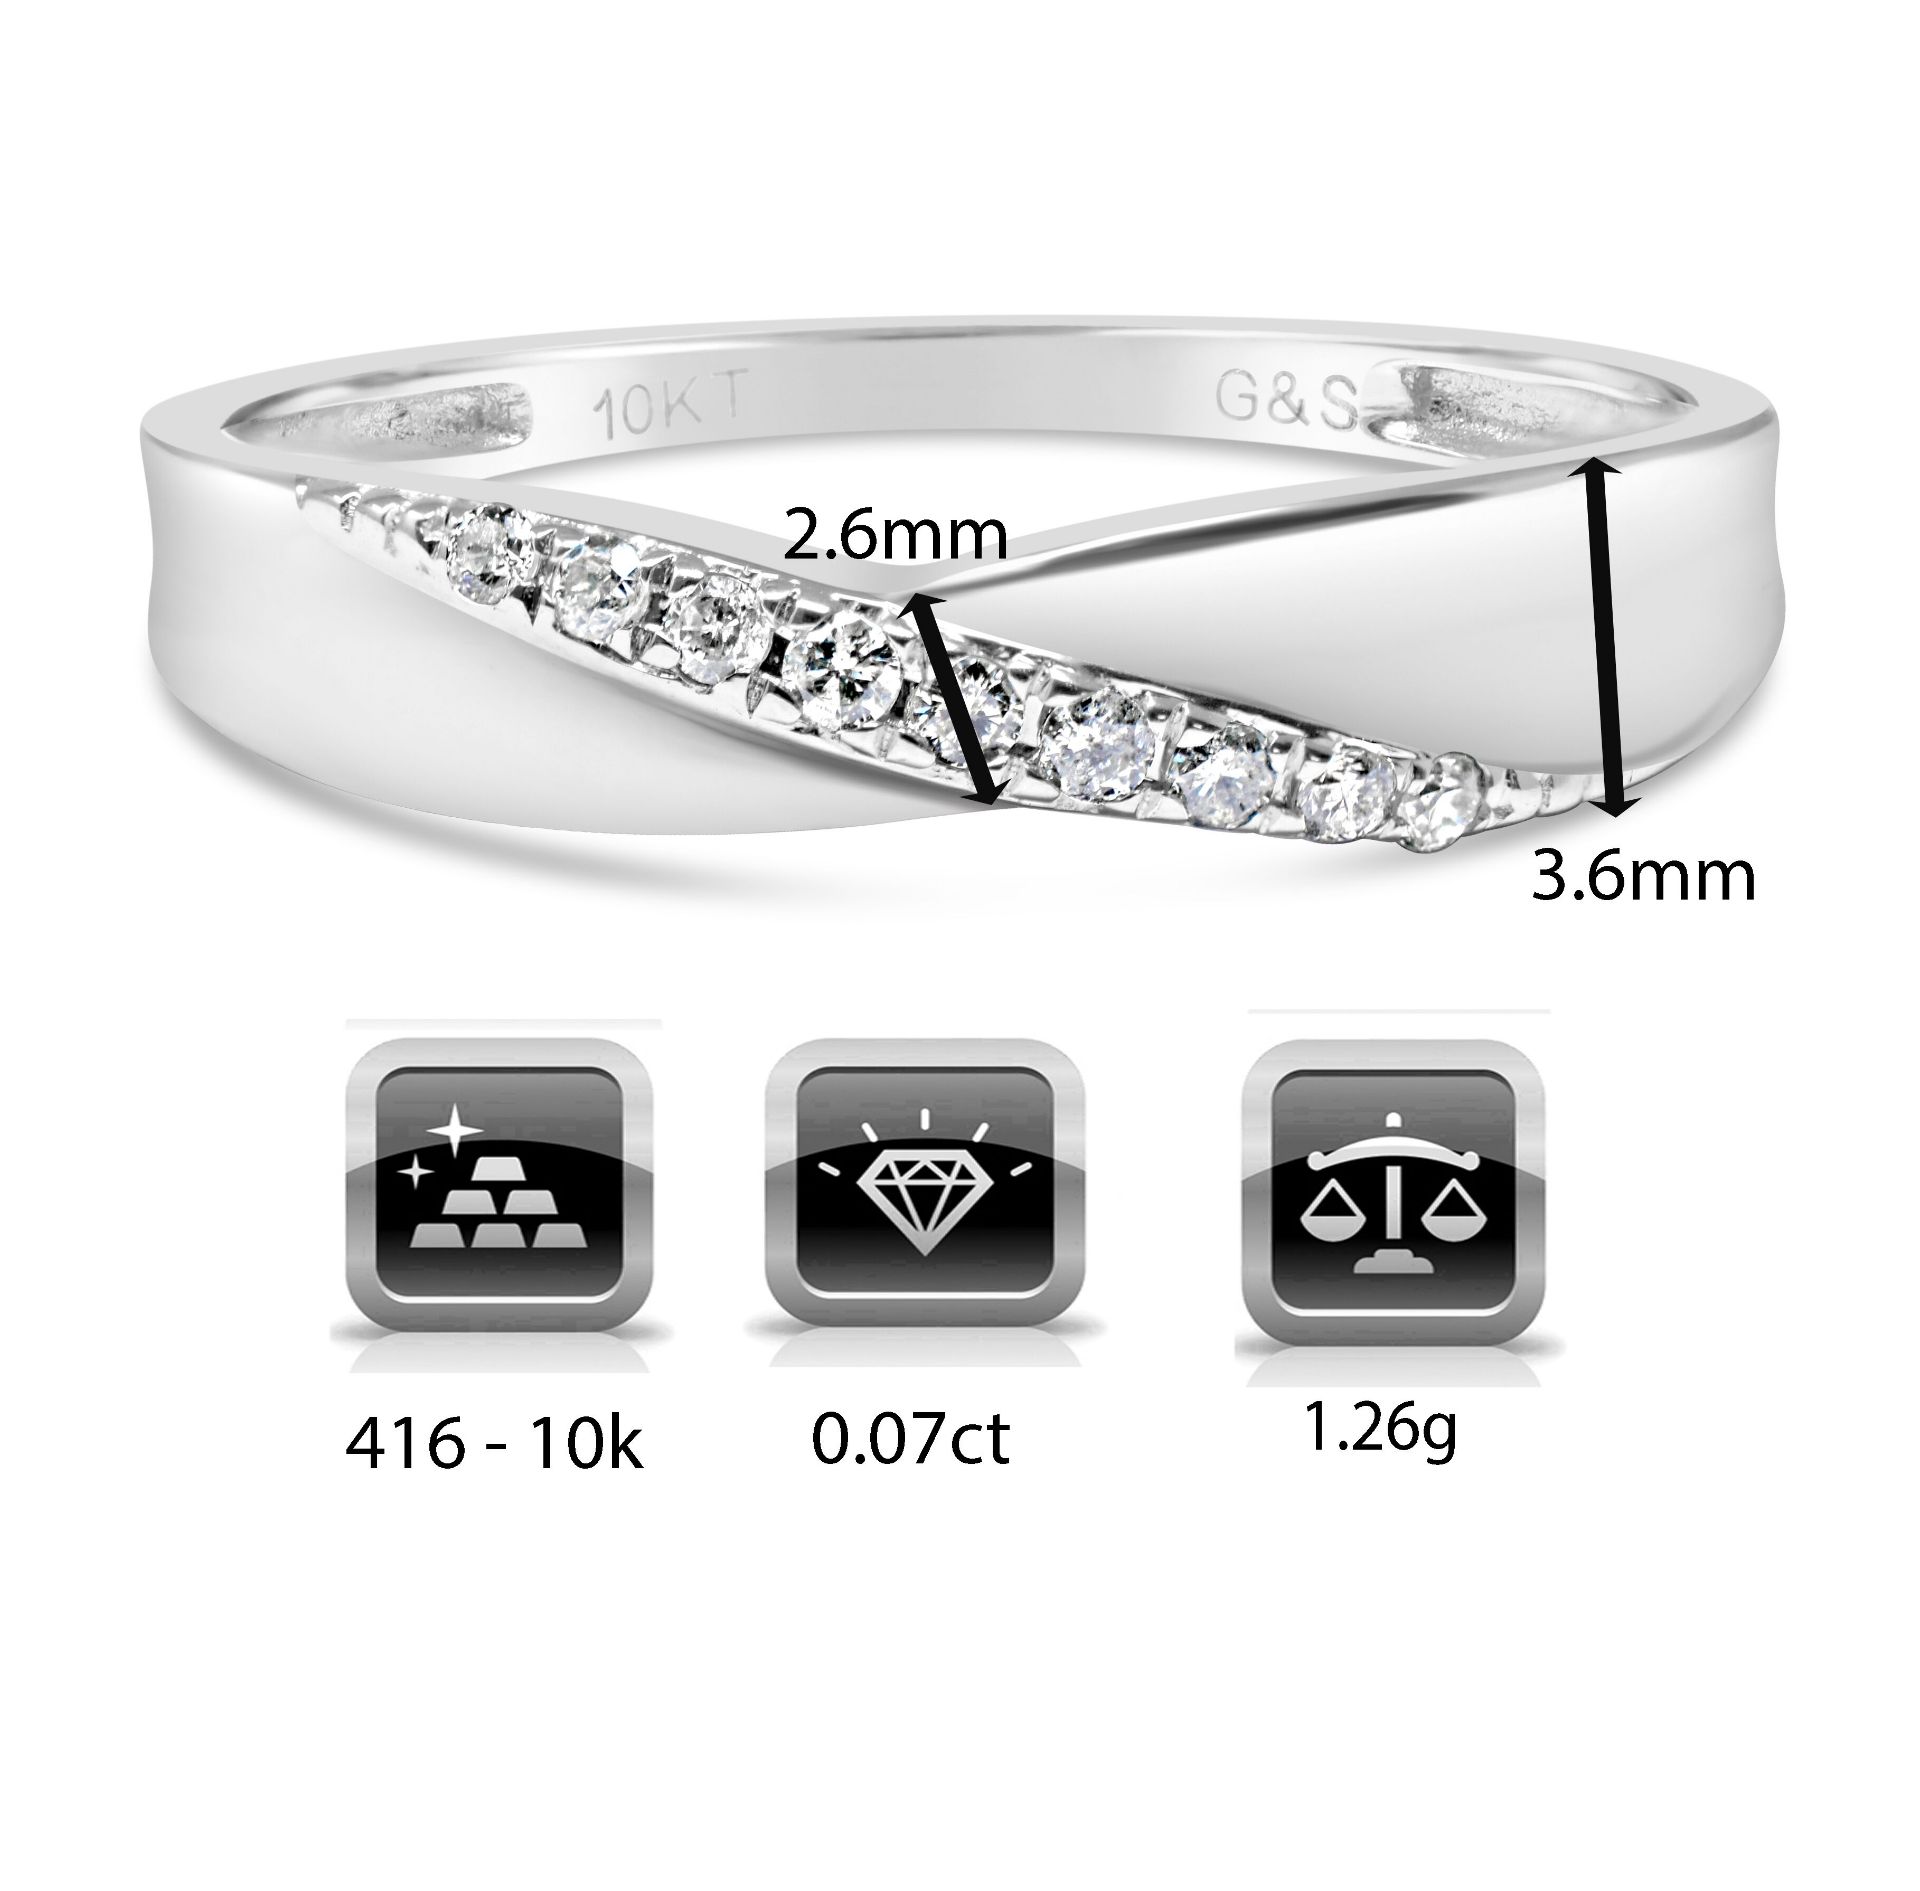 9CT White Gold Diamond Band with Twist, Size Q, Me - Image 2 of 4